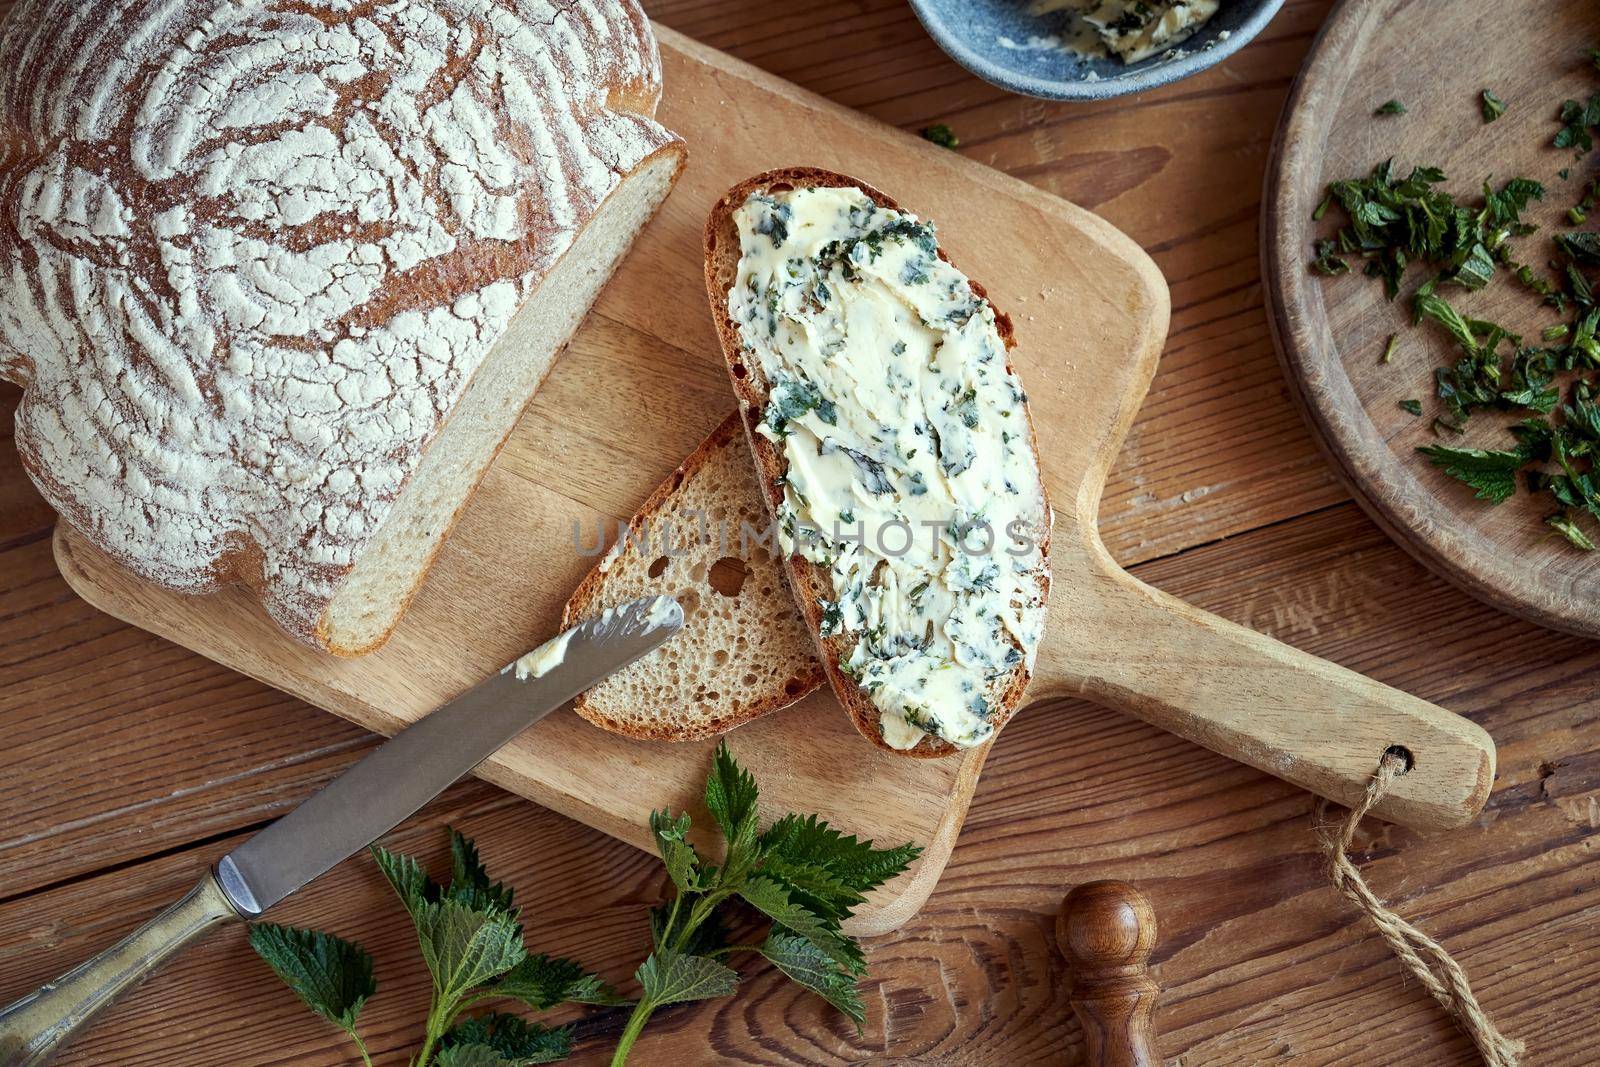 A slice of sourdough bread with herbal butter made from fresh nettles by madeleine_steinbach